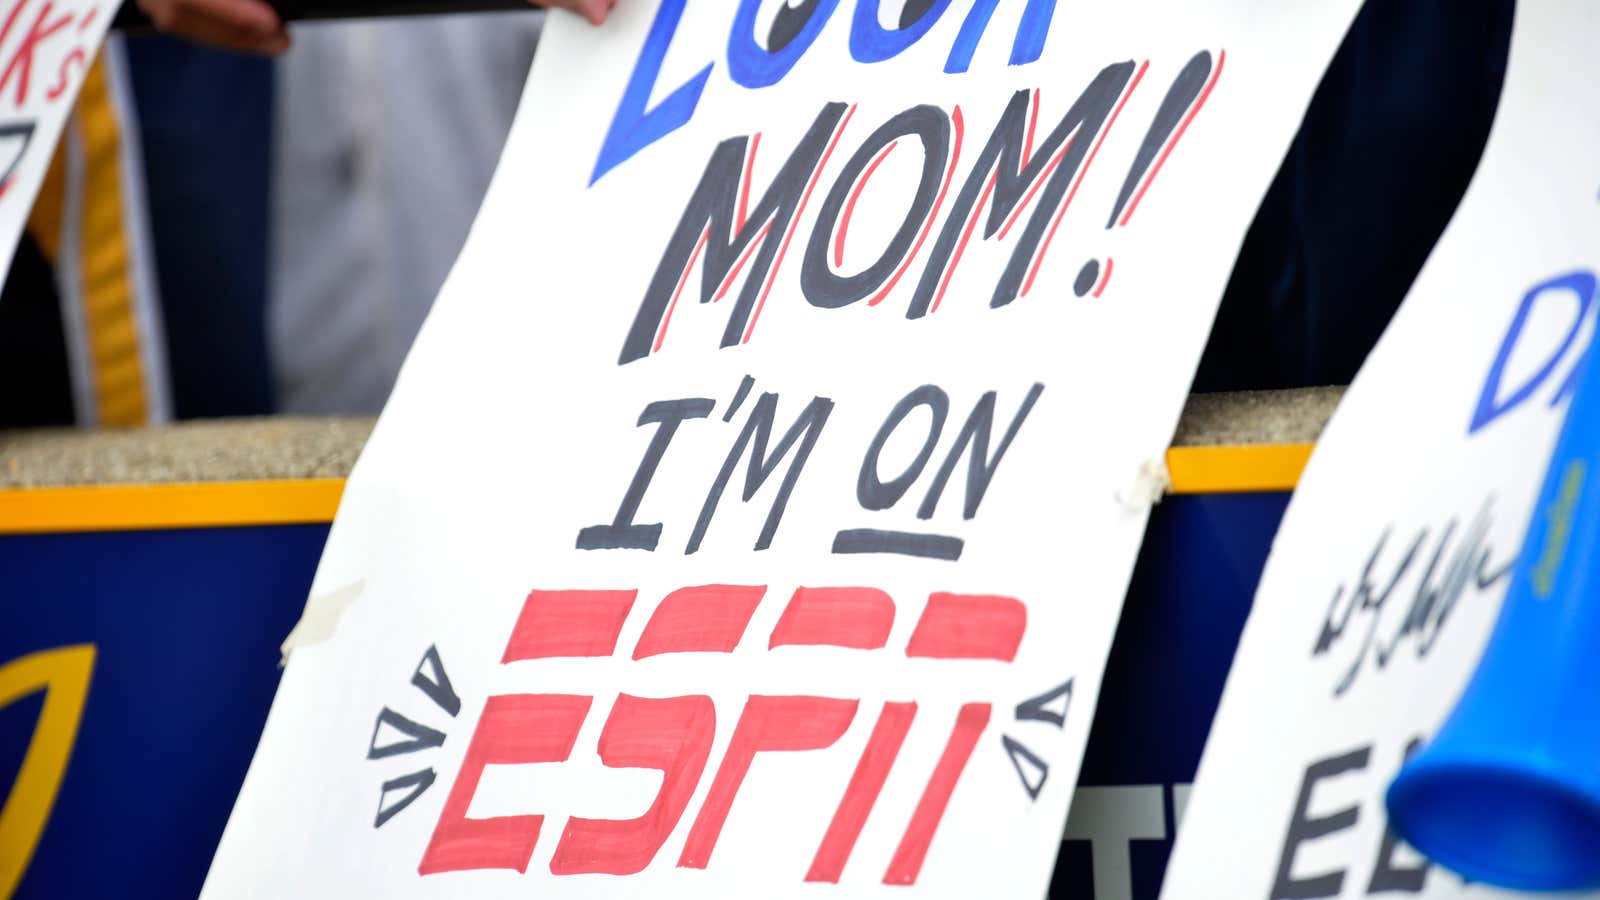 Soon, ESPN will be on DIsh’s streaming service.